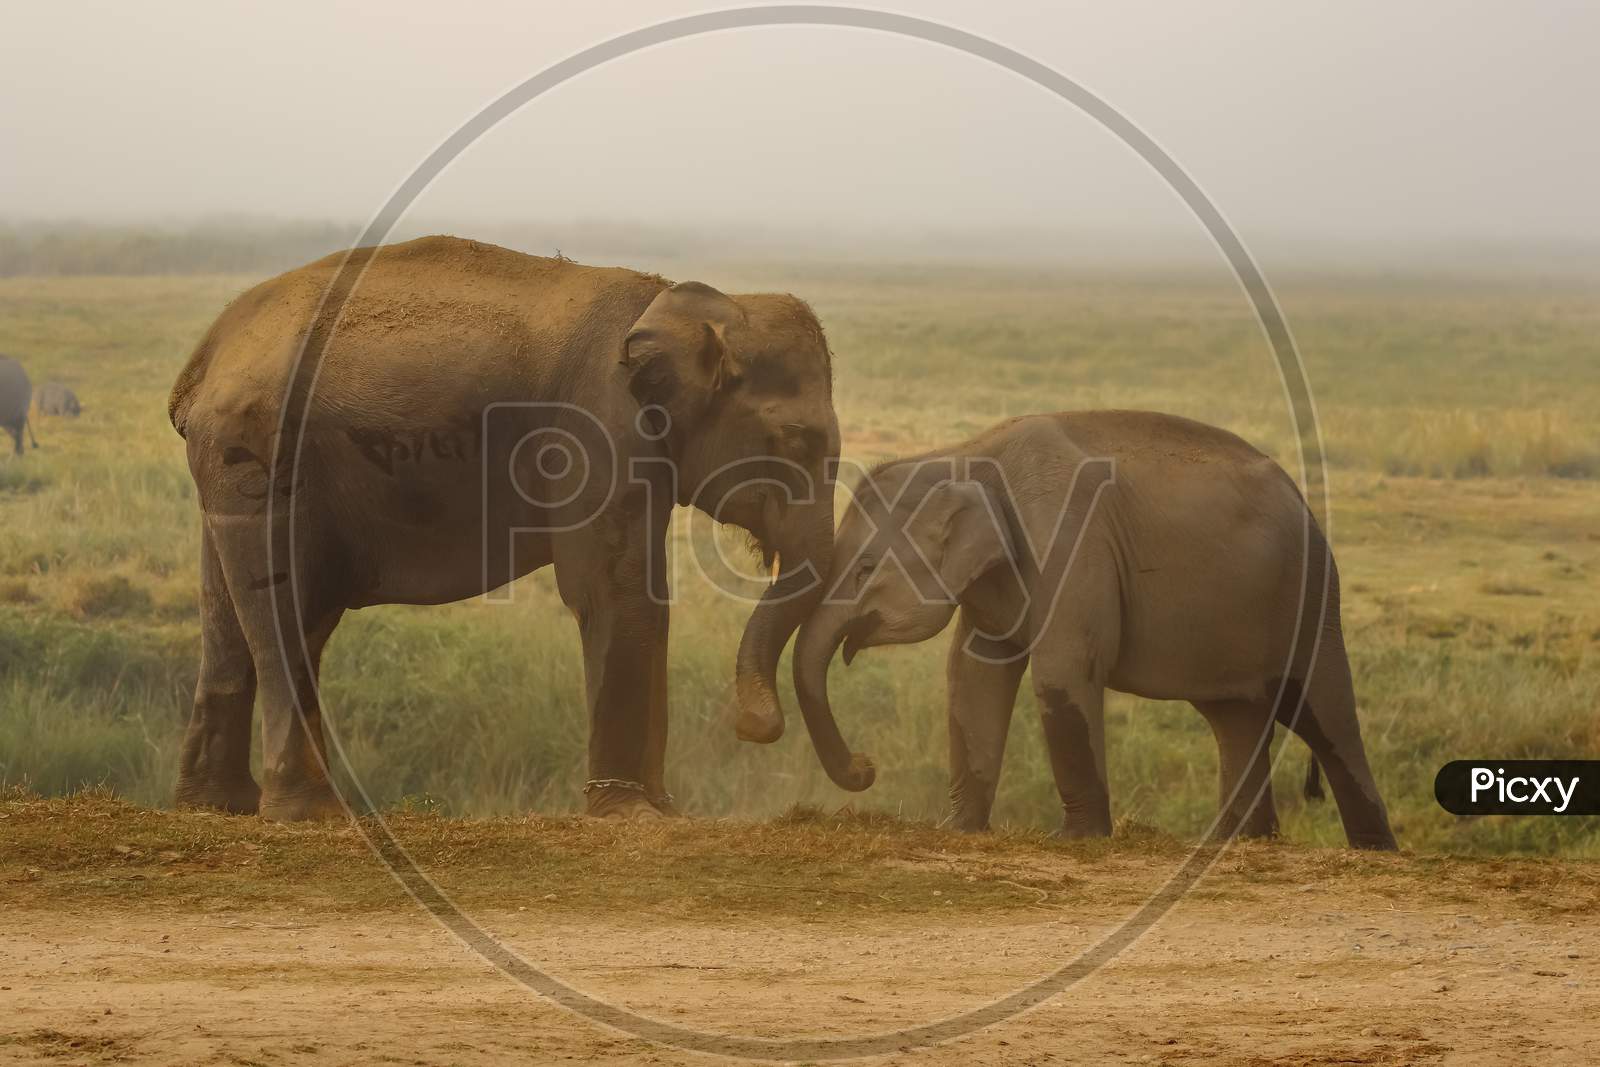 Two elephants with tusks playing together